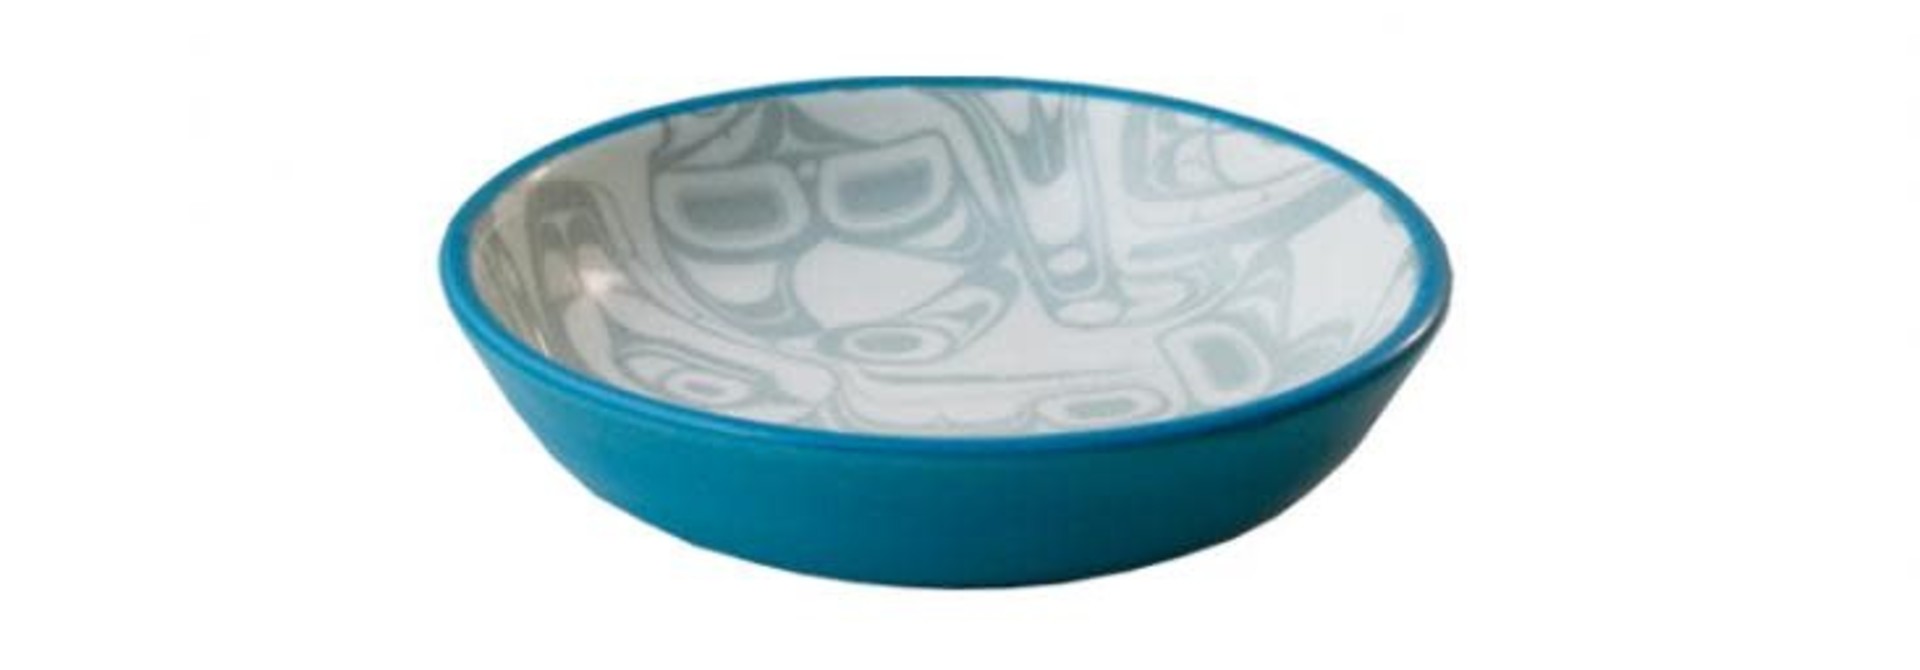 KR Orca Small Dish Turquoise/Grey Kelly Robinson